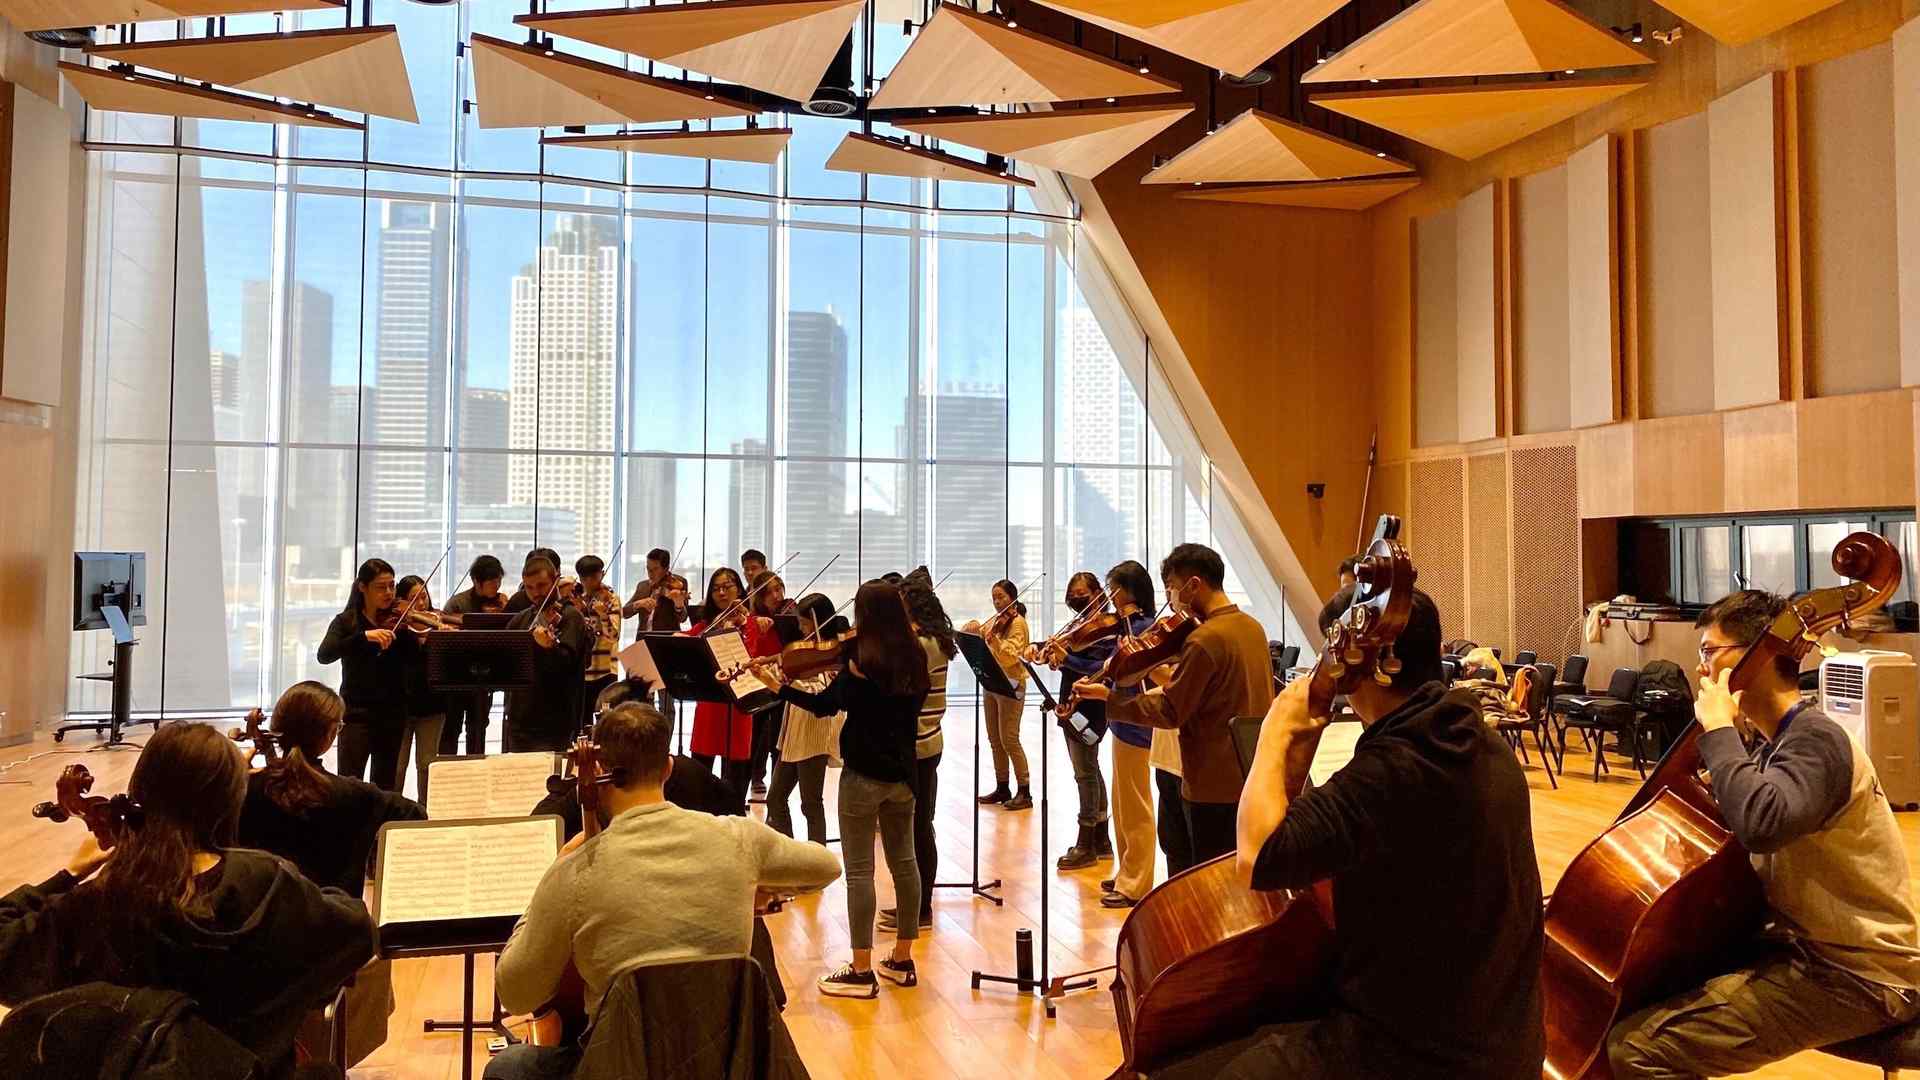 Orchestral musicians gathered in a rehearsal room featuring contemporary design and floor-to-ceiling windows looking out to skyscrapers against a blue sky